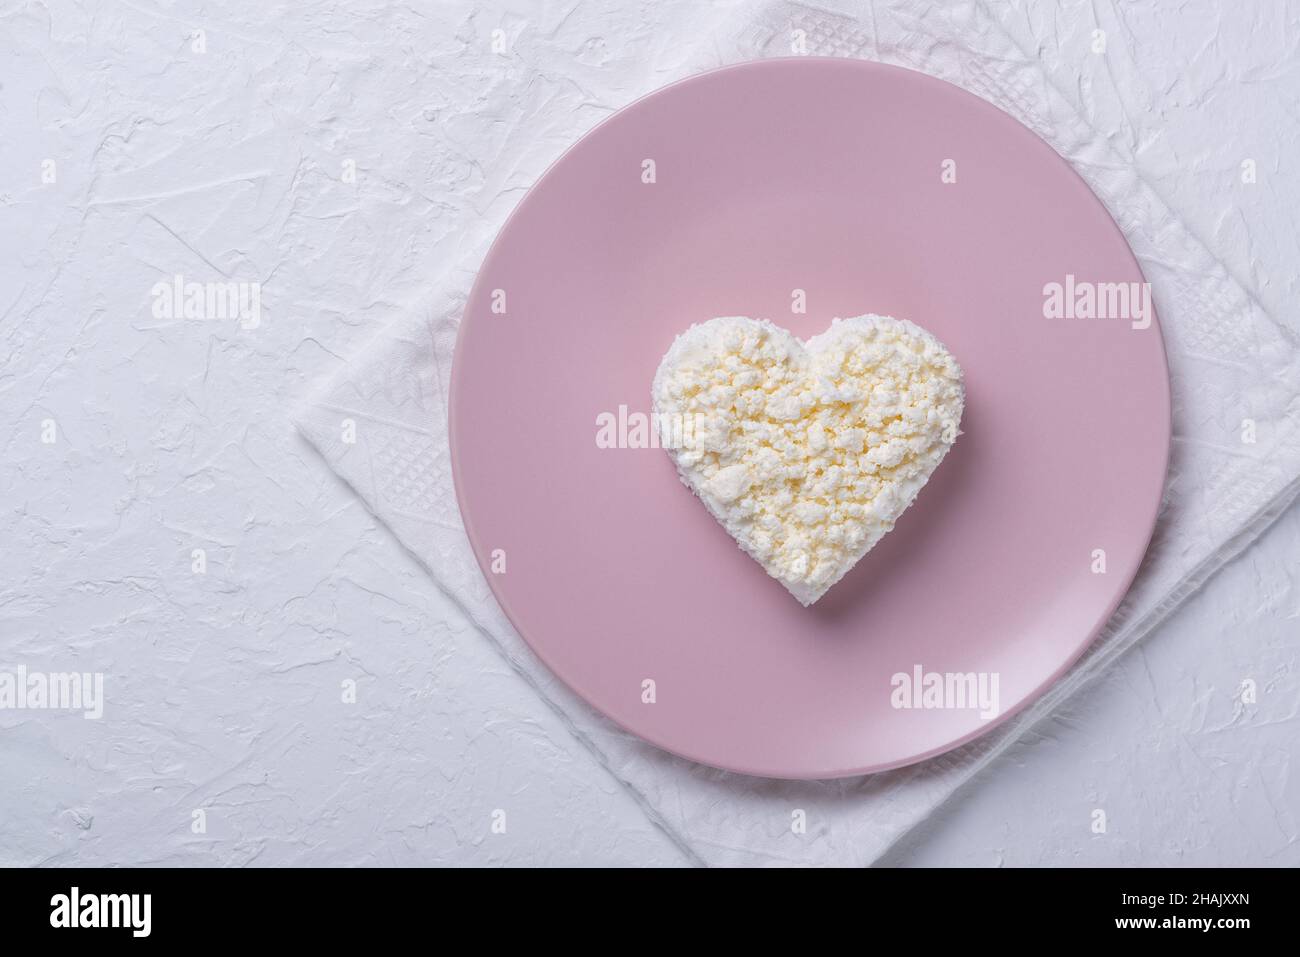 Heart shaped cottage cheese in a pink plate on a white table. Stock Photo